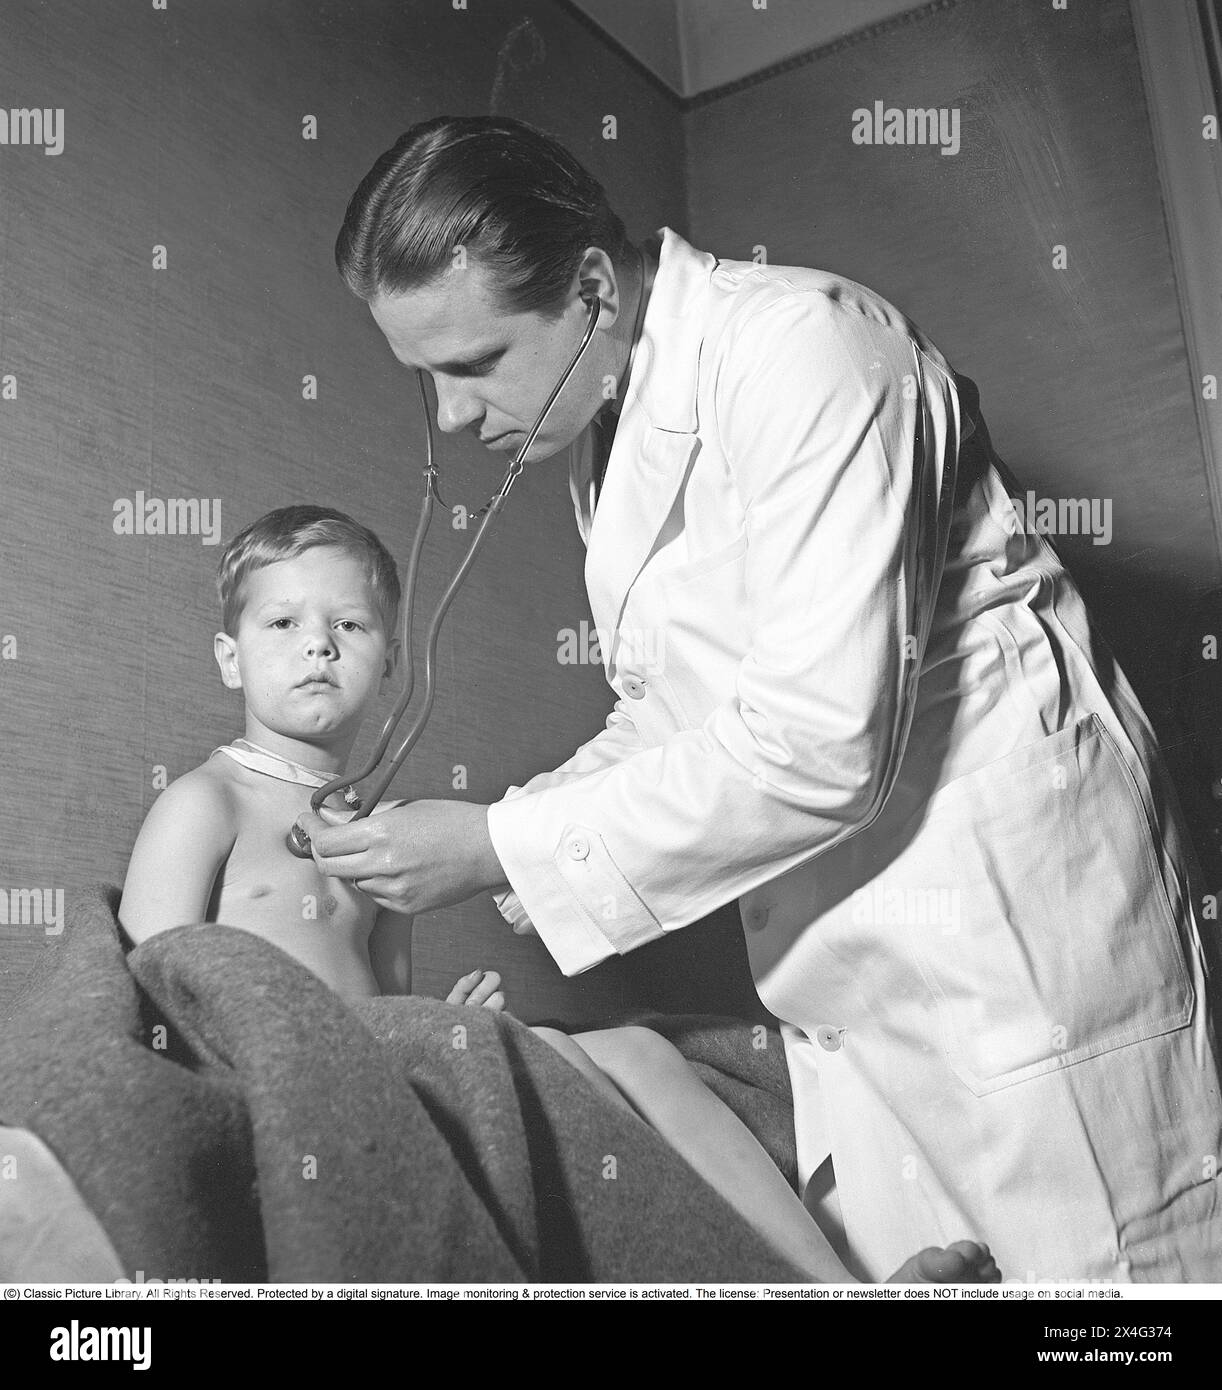 World War 2 in Europe. Finnish children in Sweden. A doctor examines a small Finnish boy with a stethoscope. The doctor has placed the note attached with a string around the neck with the boy's name on the boy's back.  In February 1944, the Finnish cities are exposed to bombings. The Finnish civilian population had to endure a lot of suffering and for that reason the evacuation of Finnish children to Sweden increased in order to put the children to safety. The children were sent from Finland to Sweden and the goal was that all children would be reunited with their relatives after the war. Many Stock Photo